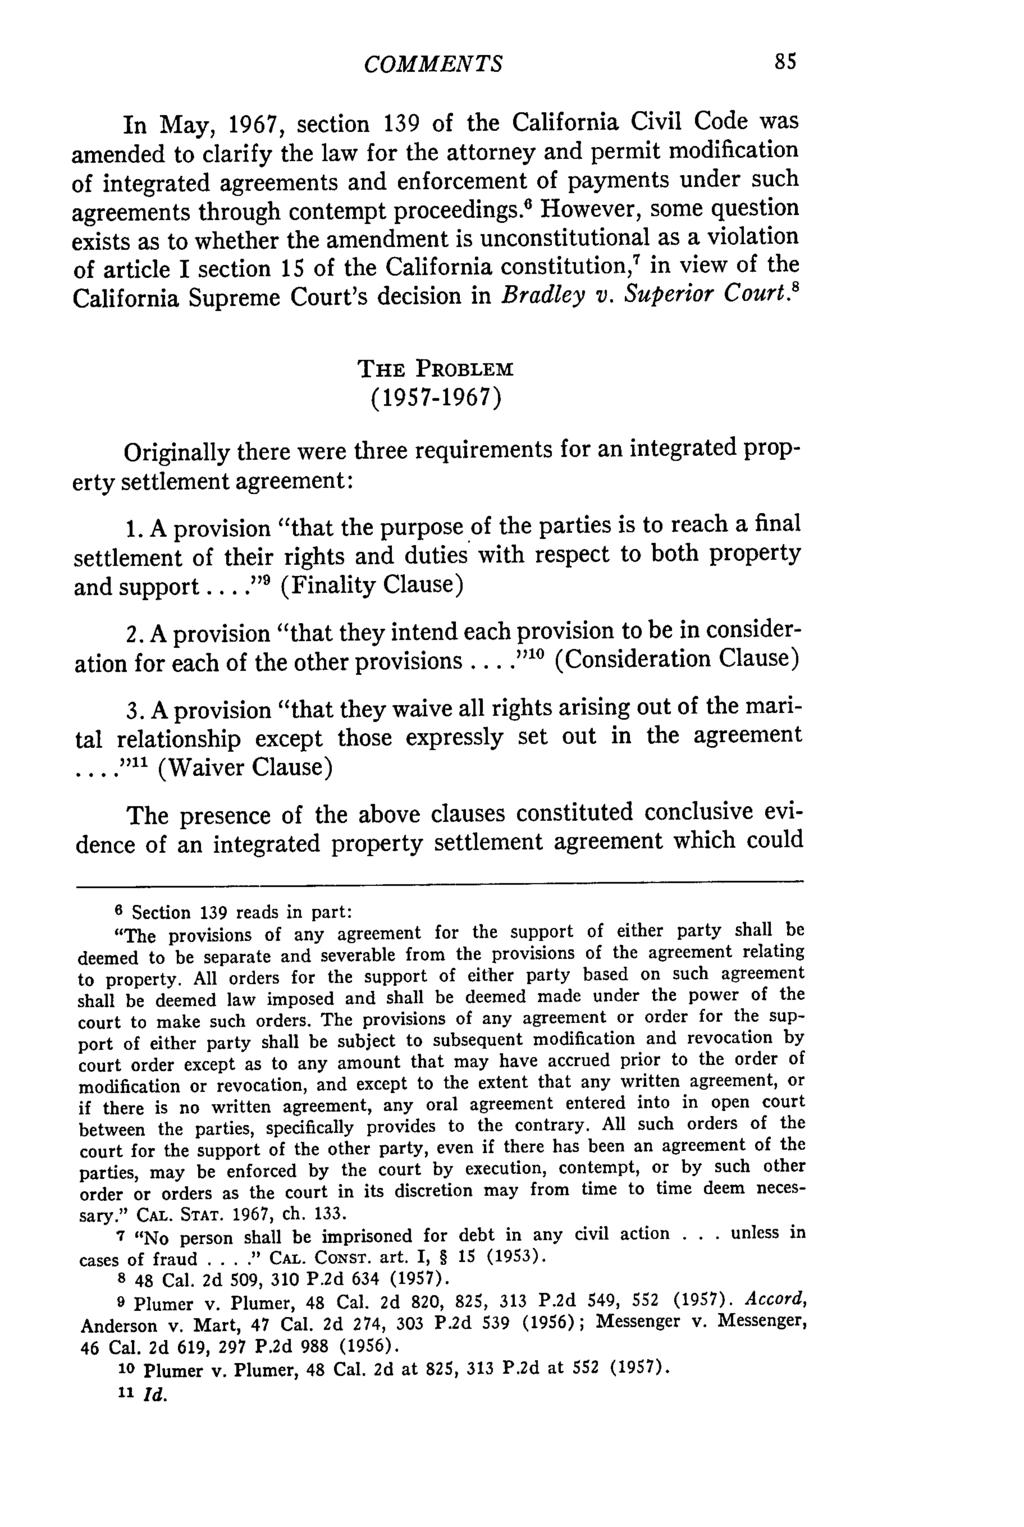 COMMENTS In May, 1967, section 139 of the California Civil Code was amended to clarify the law for the attorney and permit modification of integrated agreements and enforcement of payments under such